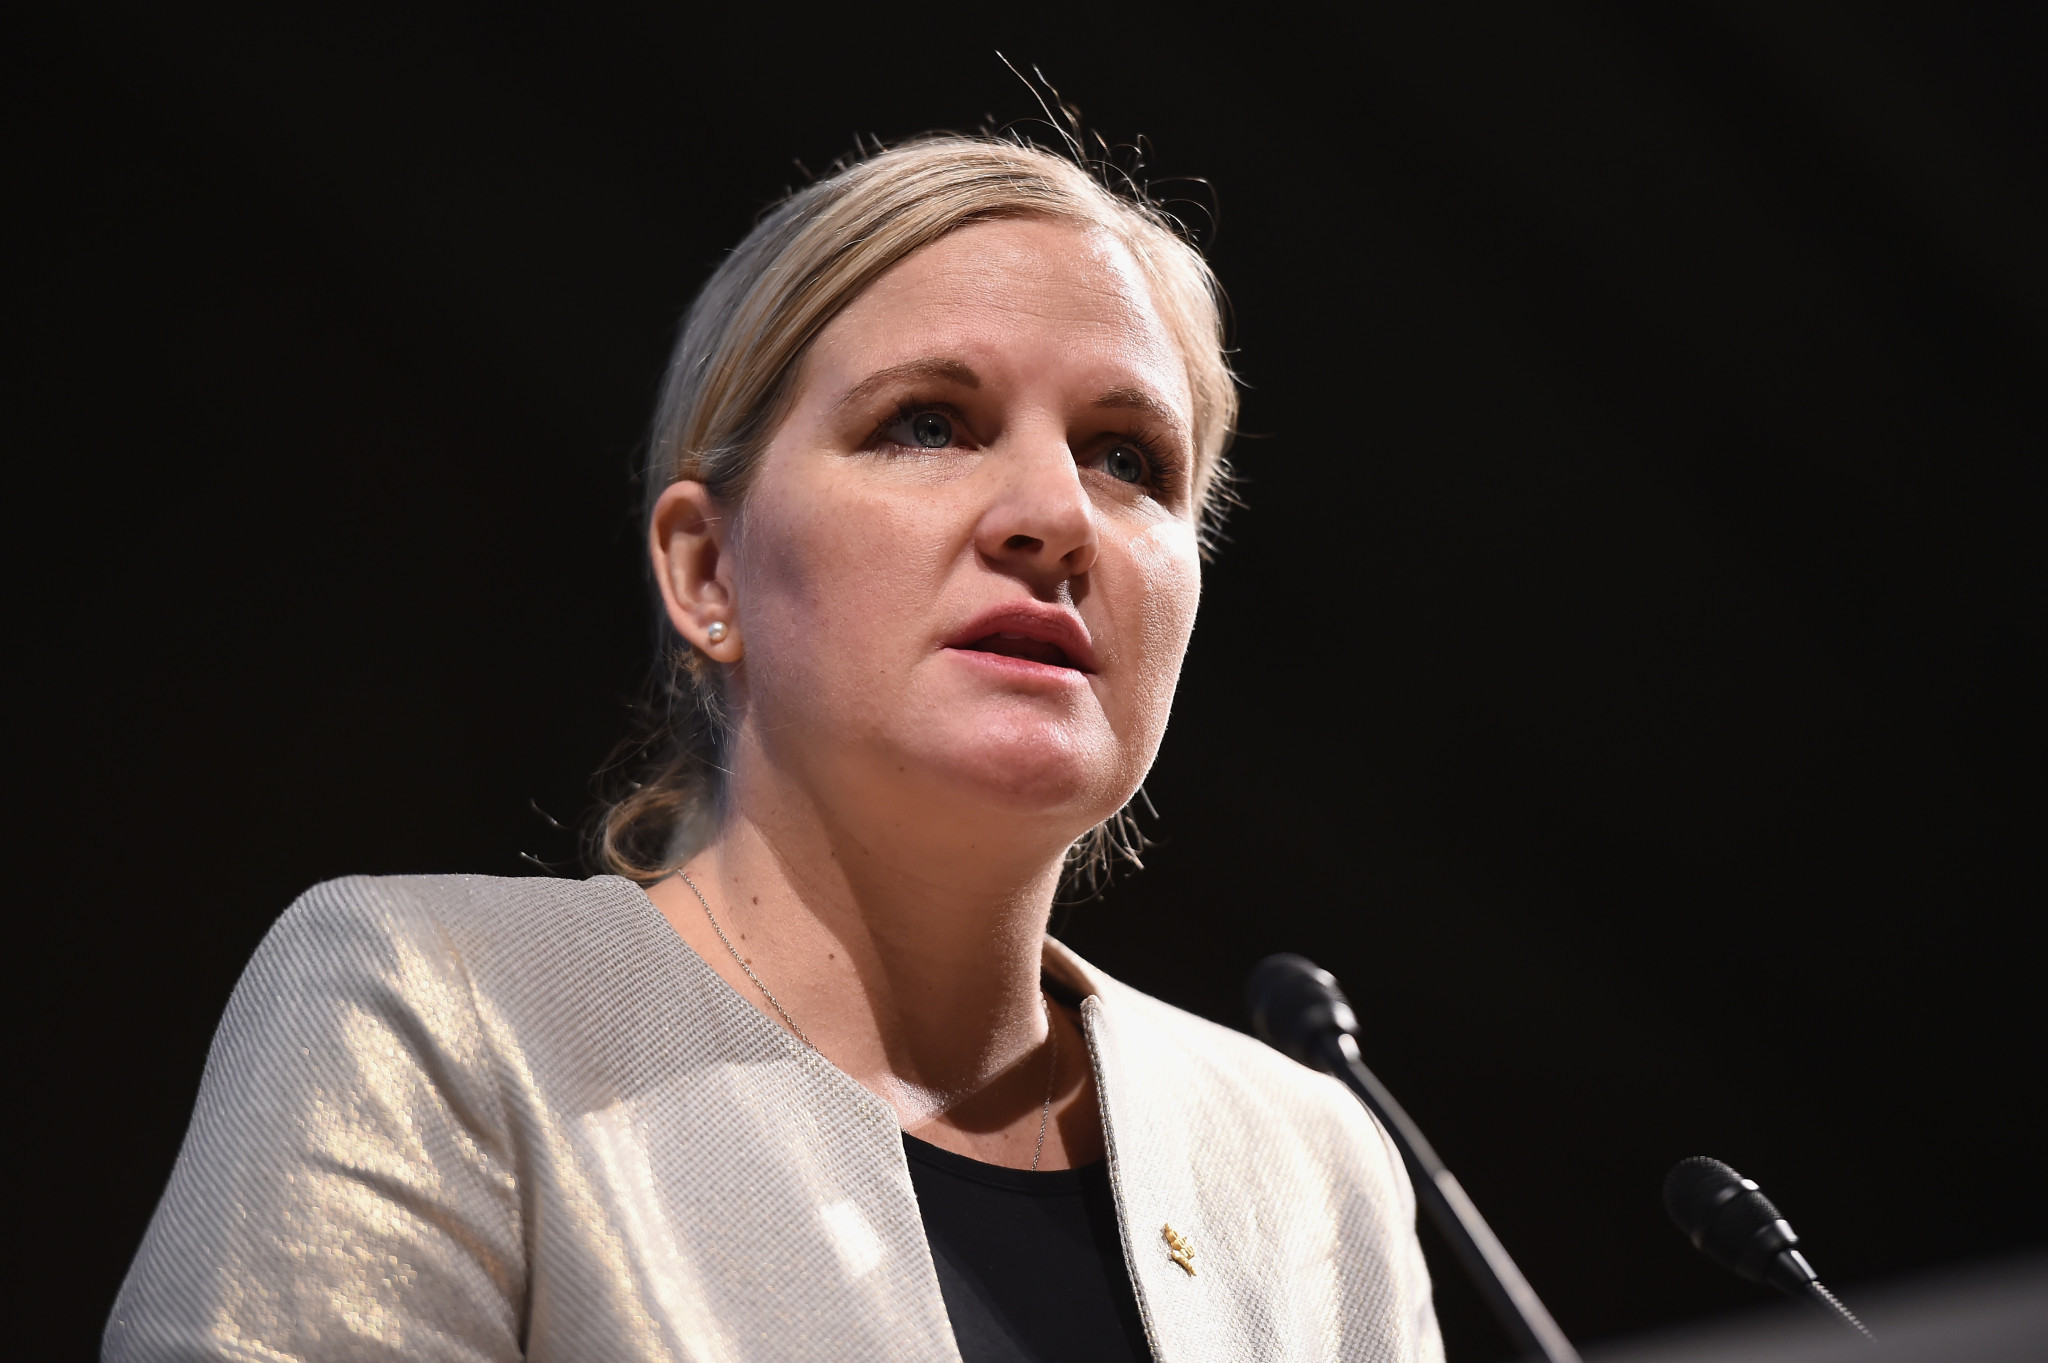 Zimbabwe's Sports Minister Kirsty Coventry has said plans to launch a new national sports strategy are at an "advanced stage" ©Getty Images